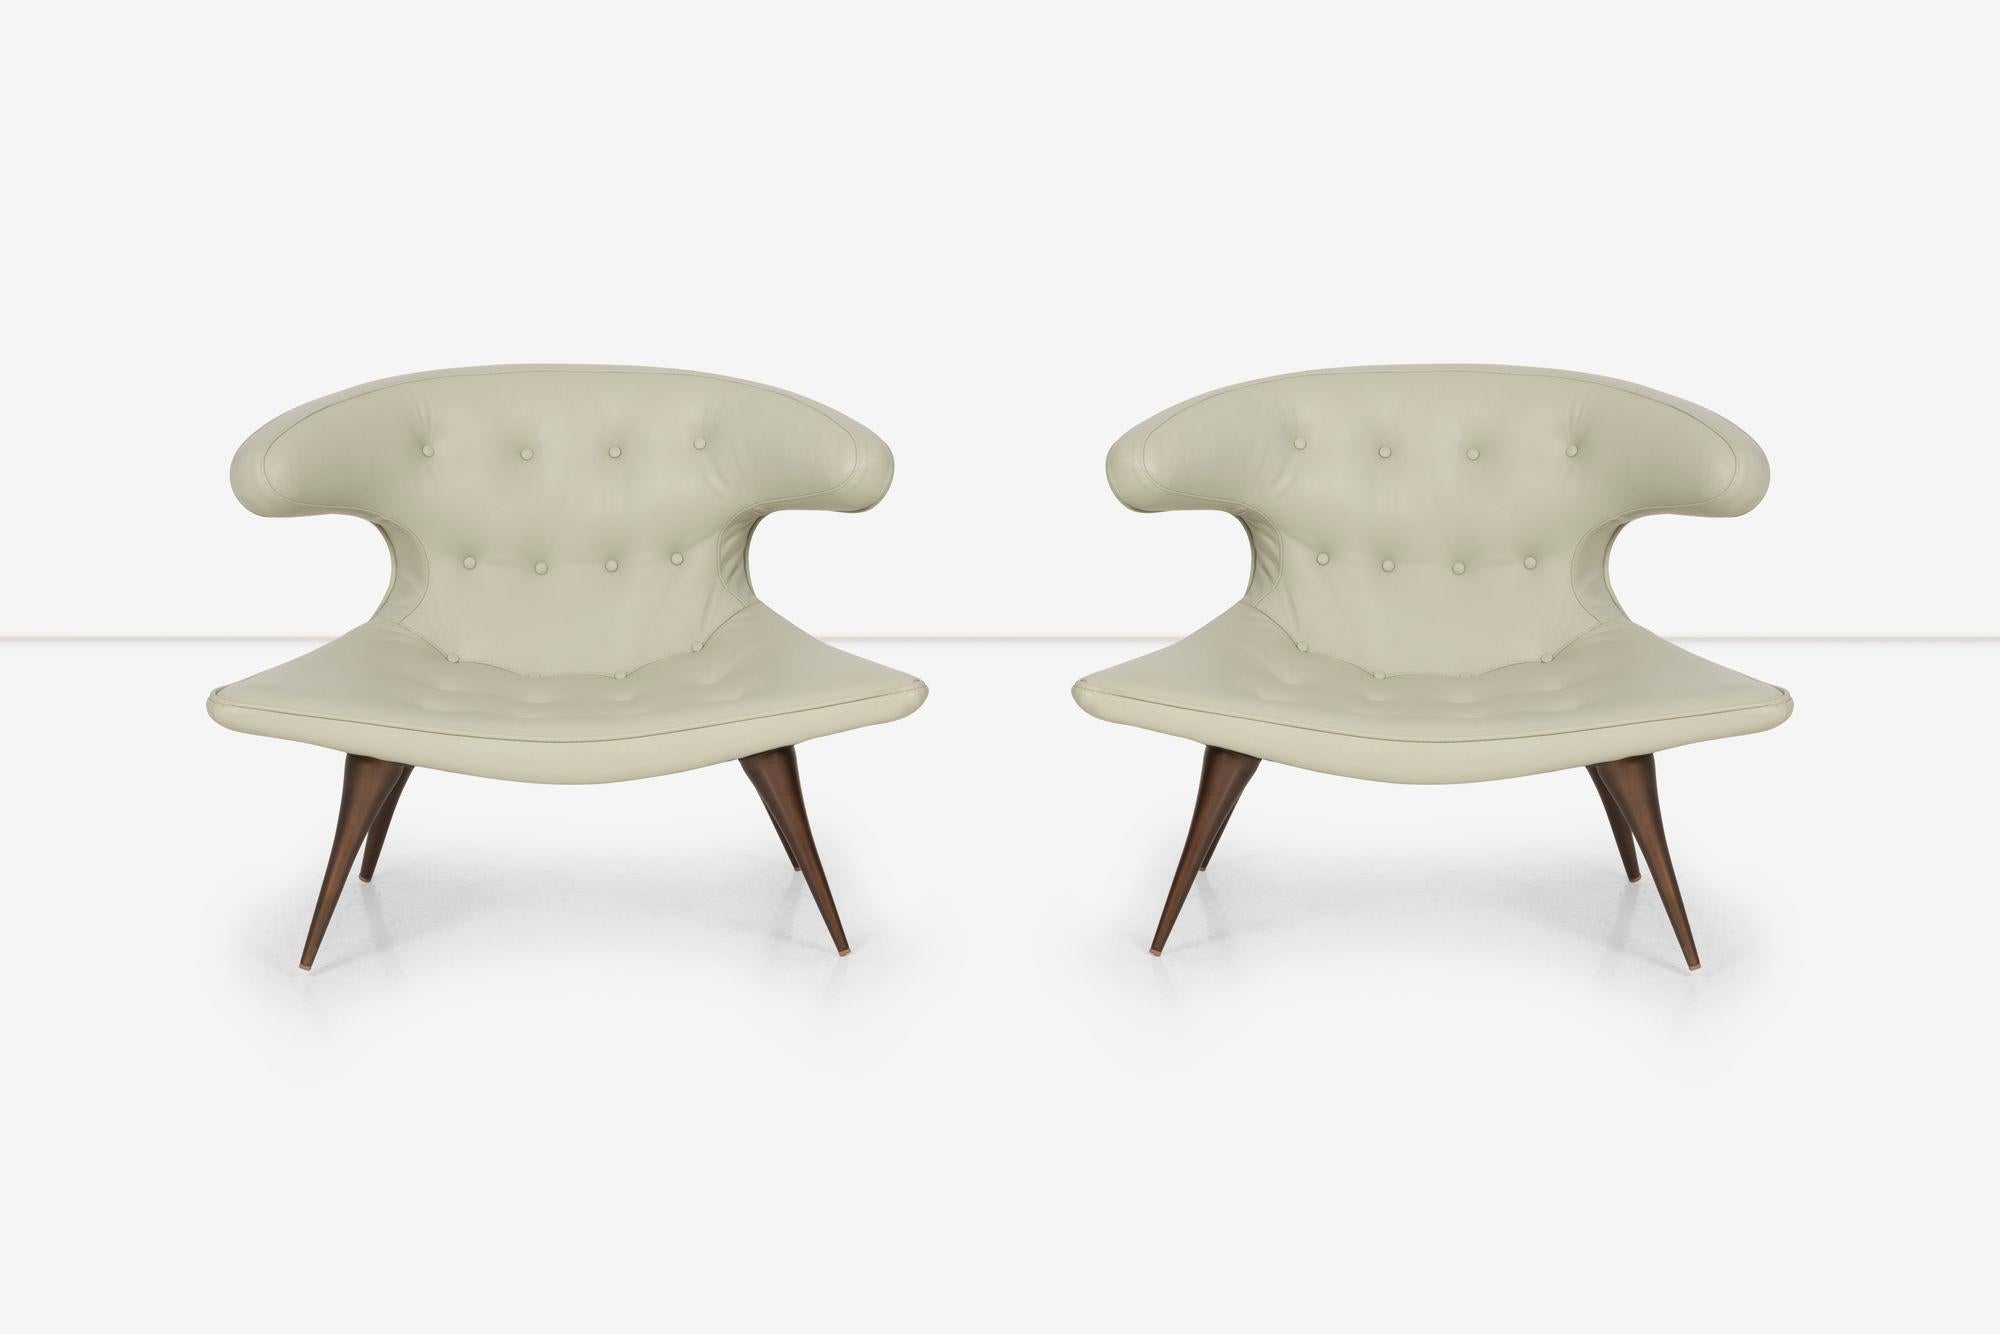 Pair of Karpen of California Horn Lounge Chairs, reupholstered with tufted buttons in Spinneybeck Leather.
Bronze painted legs, Seat Height 12.50 center and , 14